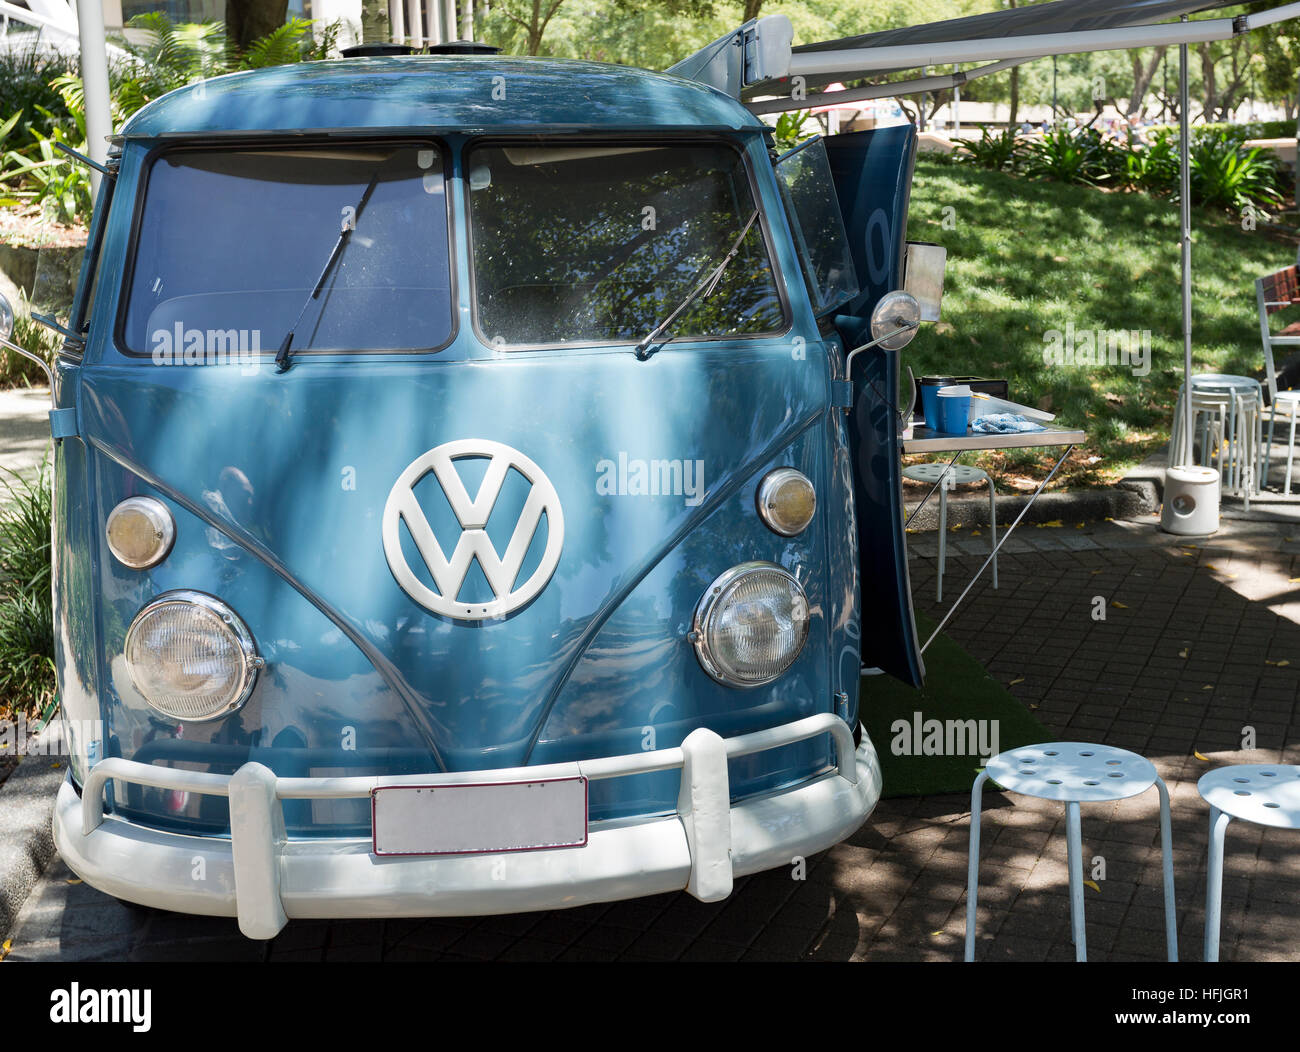 Well preserved and maintained 1966 VW Kombi retro vintage car in Brisbane, Australia Stock Photo